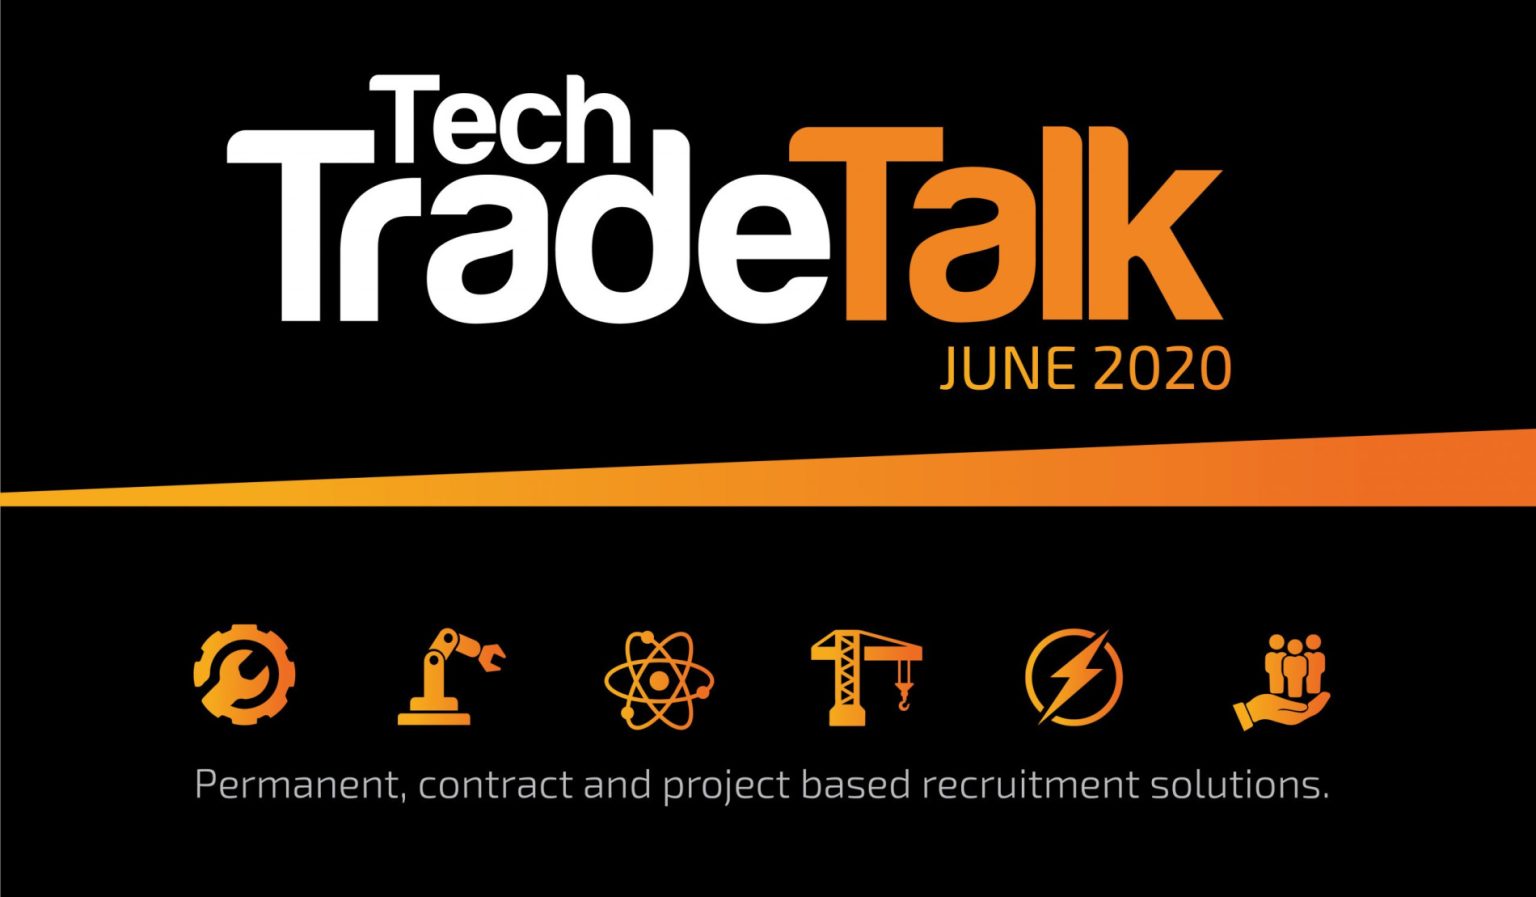 TechTrade-Talk-JUNE-scaled